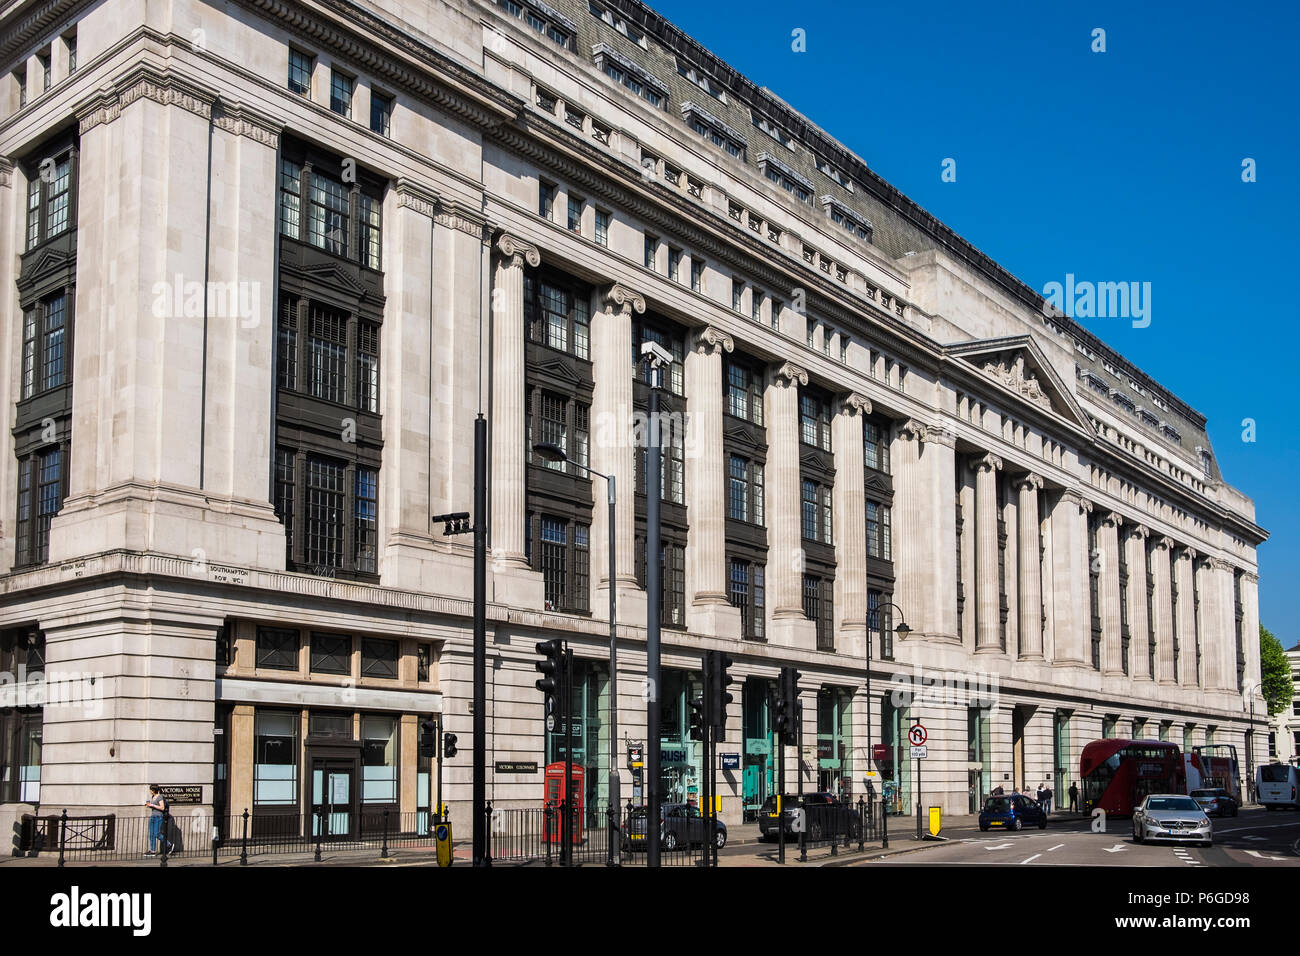 Victoria House was constructed in the 1920s, and for many decades occupied by the Liverpool Victoria Friendly Society, London, England, U.K. Stock Photo